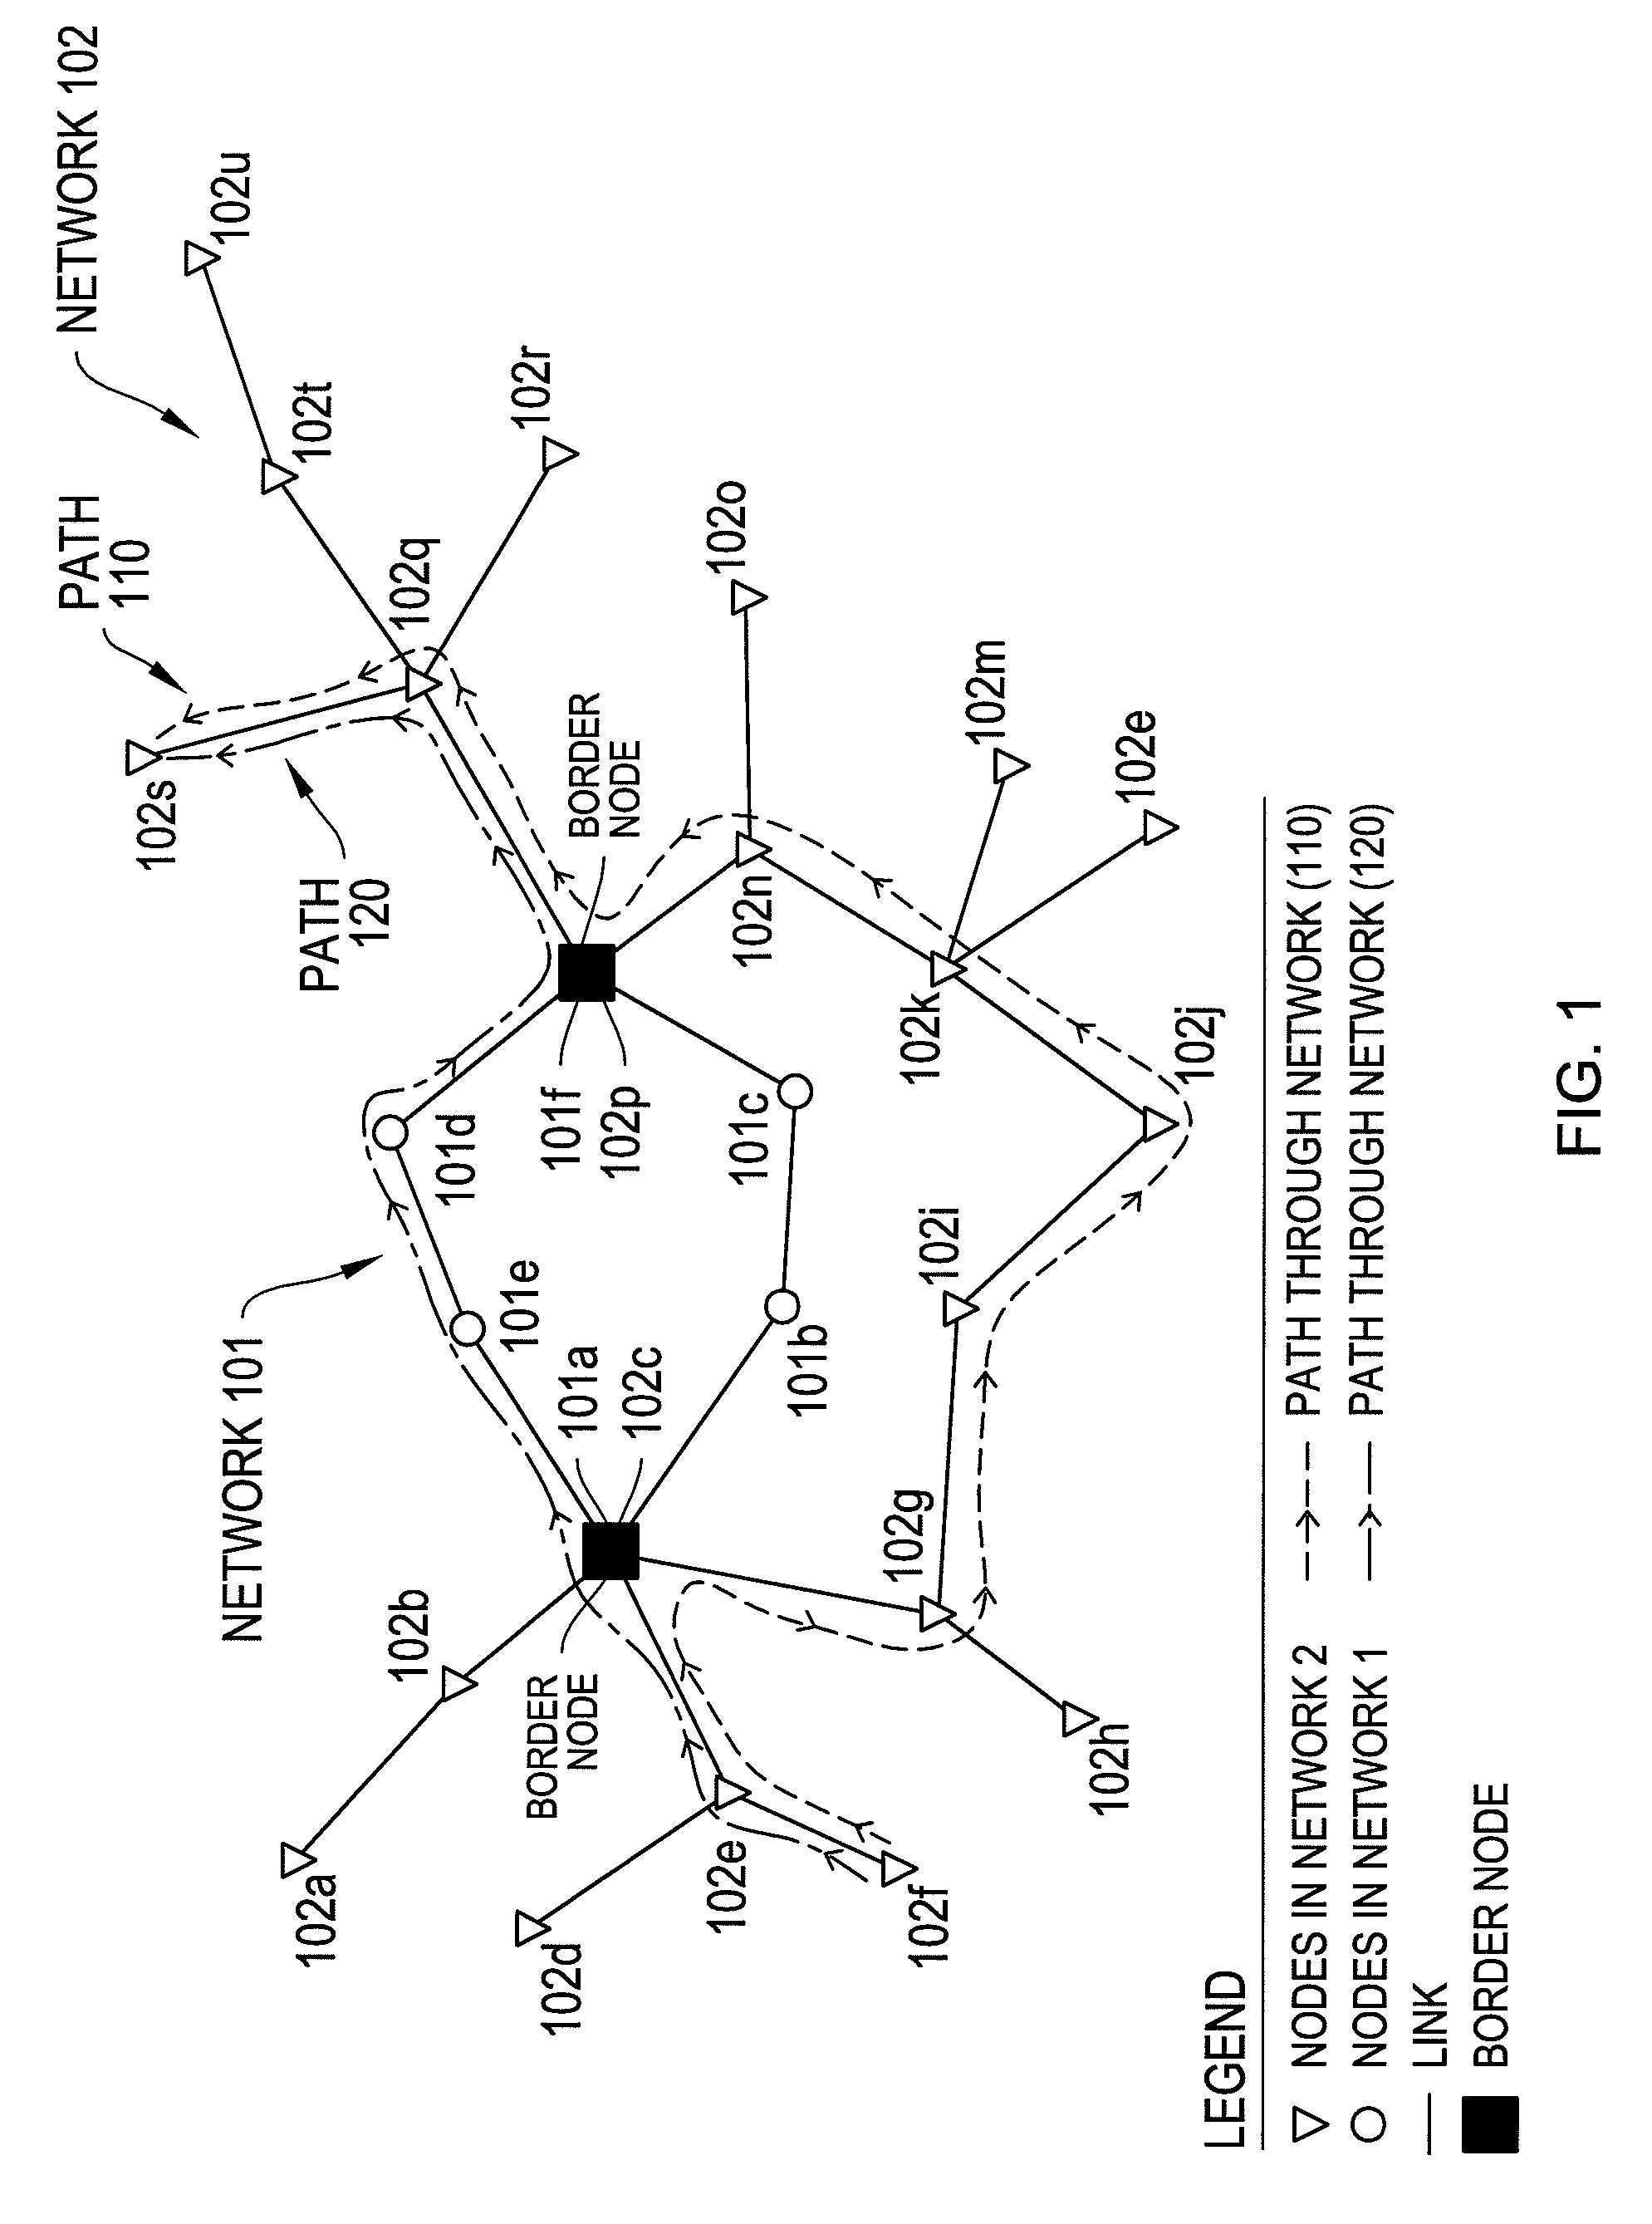 System, device, and method for unifying differently-routed networks using virtual topology representations